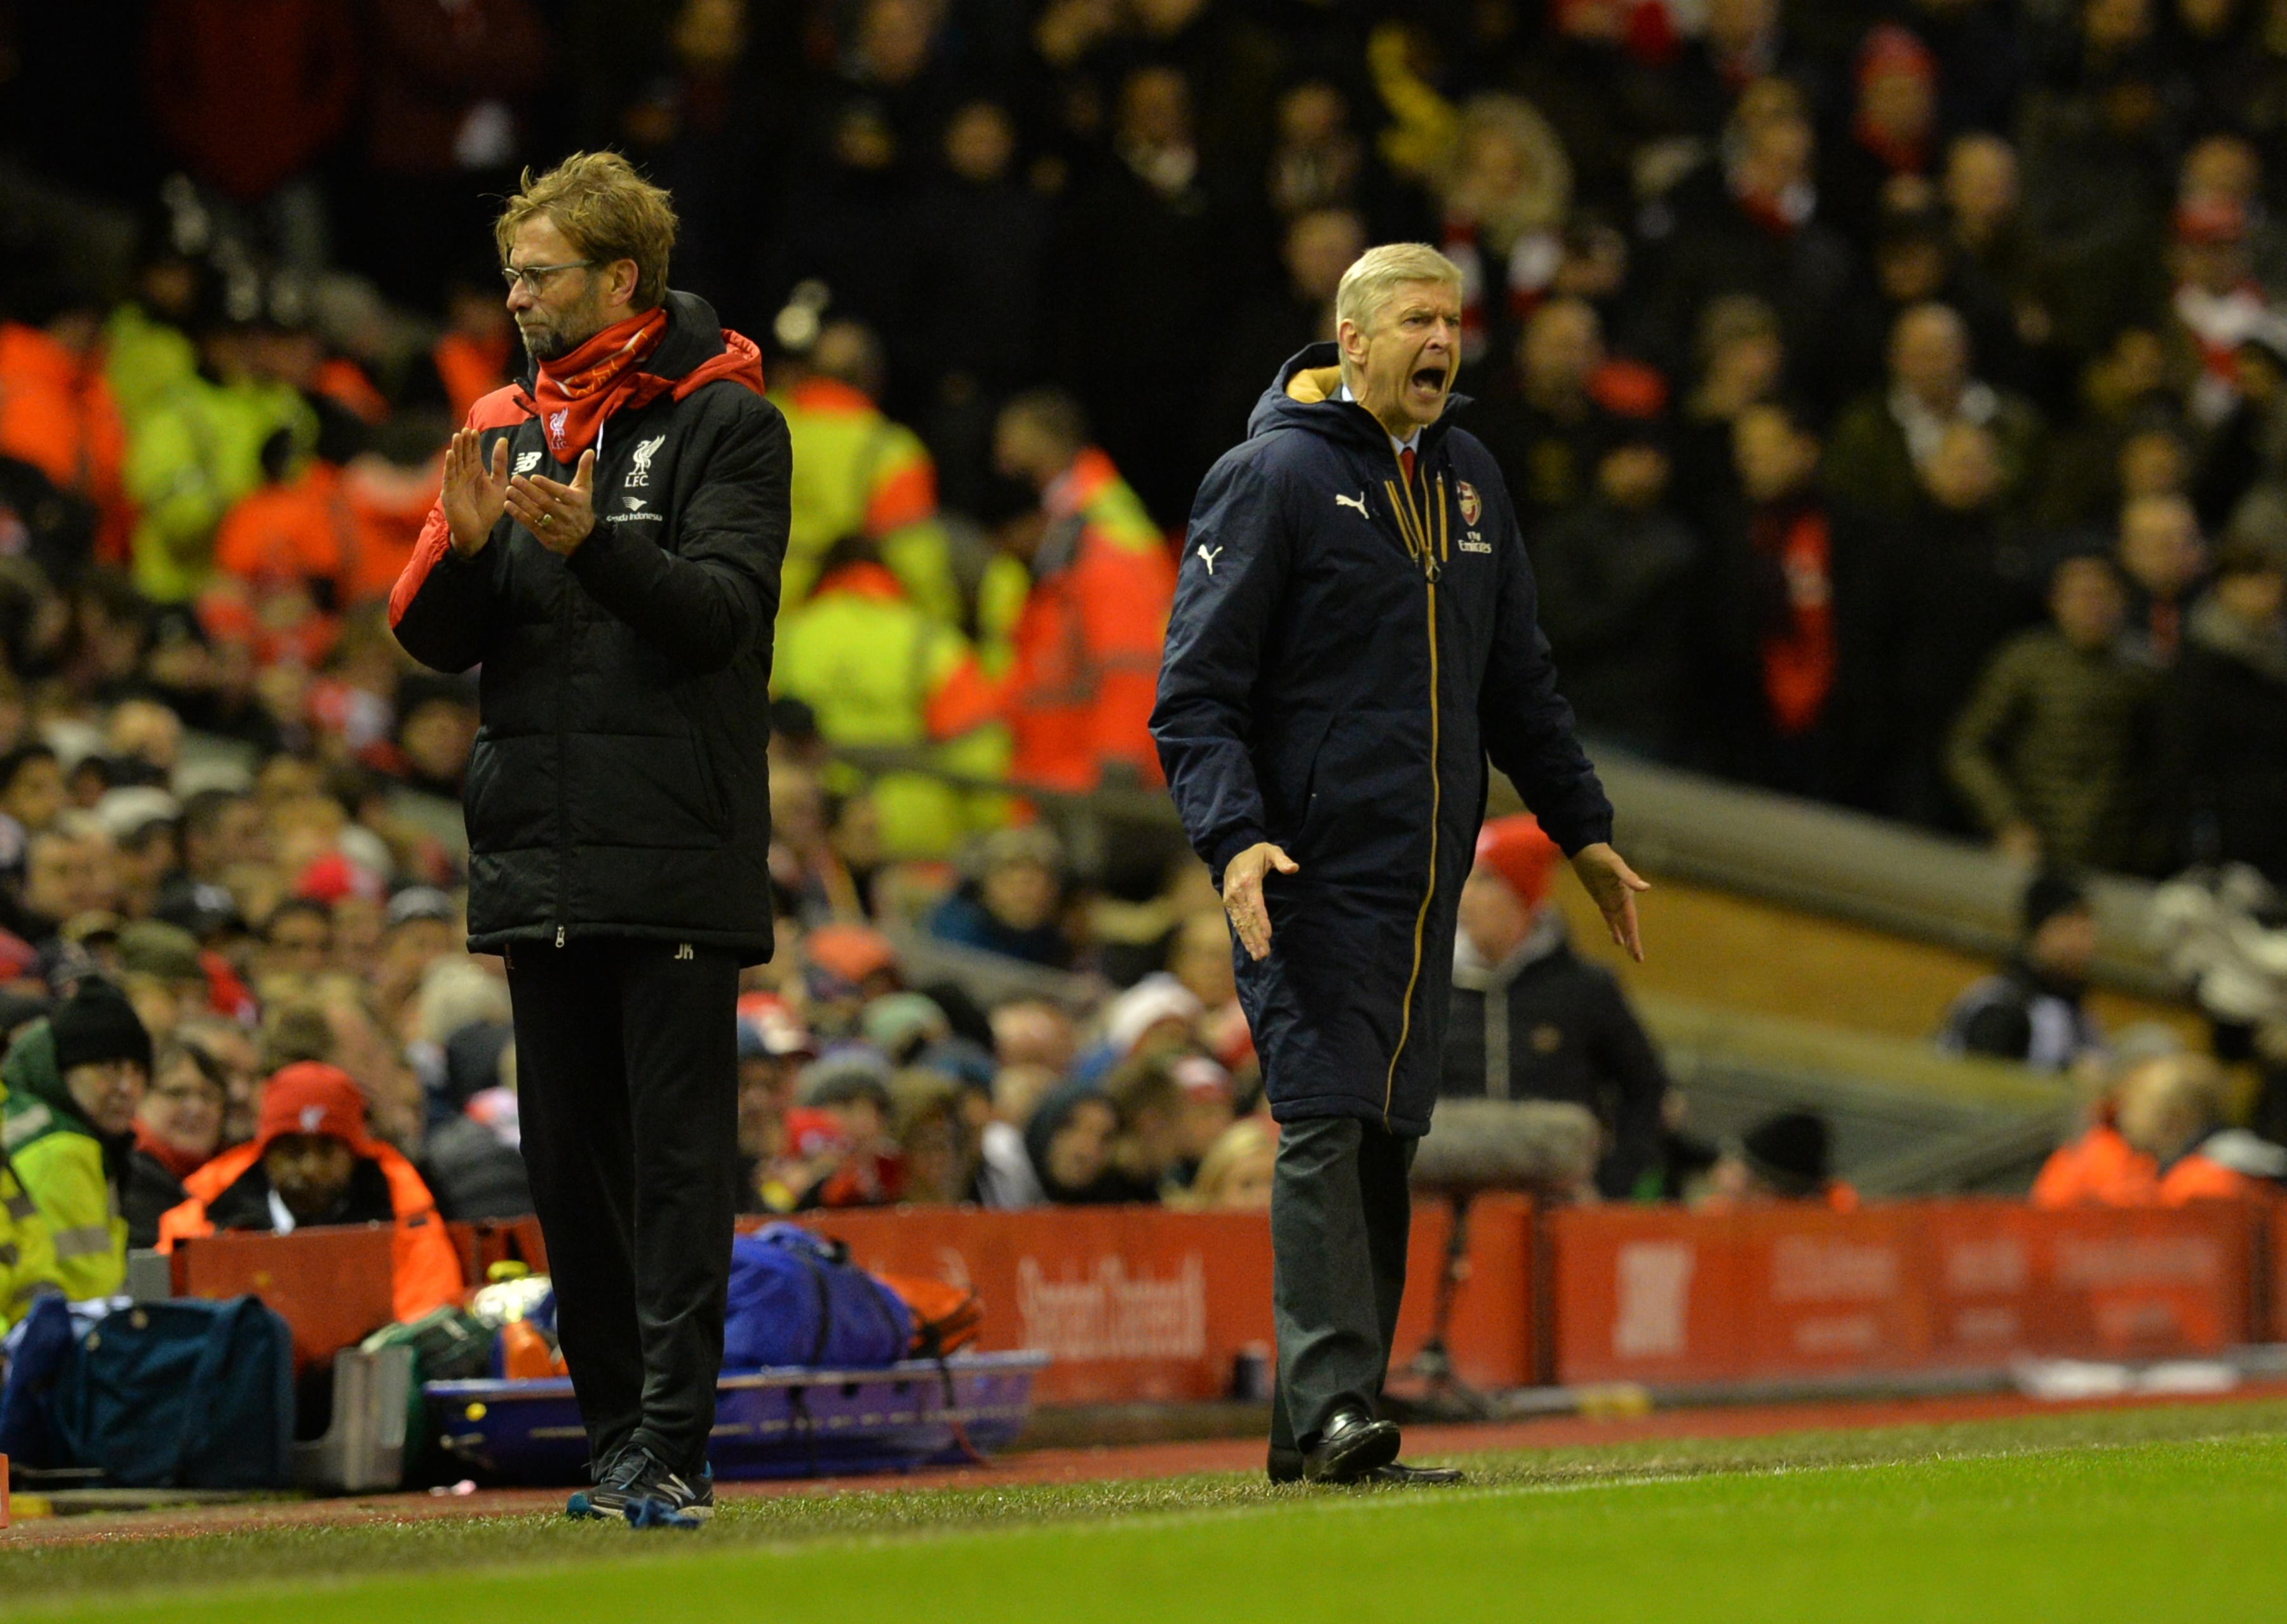 Liverpool's German manager Jurgen Klopp (L) and Arsenal's French manager Arsene Wenger react during the English Premier League football match between Liverpool and Arsenal at Anfield stadium in Liverpool, north-west England on January 13, 2016.
AFP PHOTO / PAUL ELLIS
RESTRICTED TO EDITORIAL USE. NO USE WITH UNAUTHORIZED AUDIO, VIDEO, DATA, FIXTURE LISTS, CLUB/LEAGUE LOGOS OR 'LIVE' SERVICES. ONLINE IN-MATCH USE LIMITED TO 75 IMAGES, NO VIDEO EMULATION. NO USE IN BETTING, GAMES OR SINGLE CLUB/LEAGUE/PLAYER PUBLICATIONS. / AFP / PAUL ELLIS        (Photo credit should read PAUL ELLIS/AFP/Getty Images)